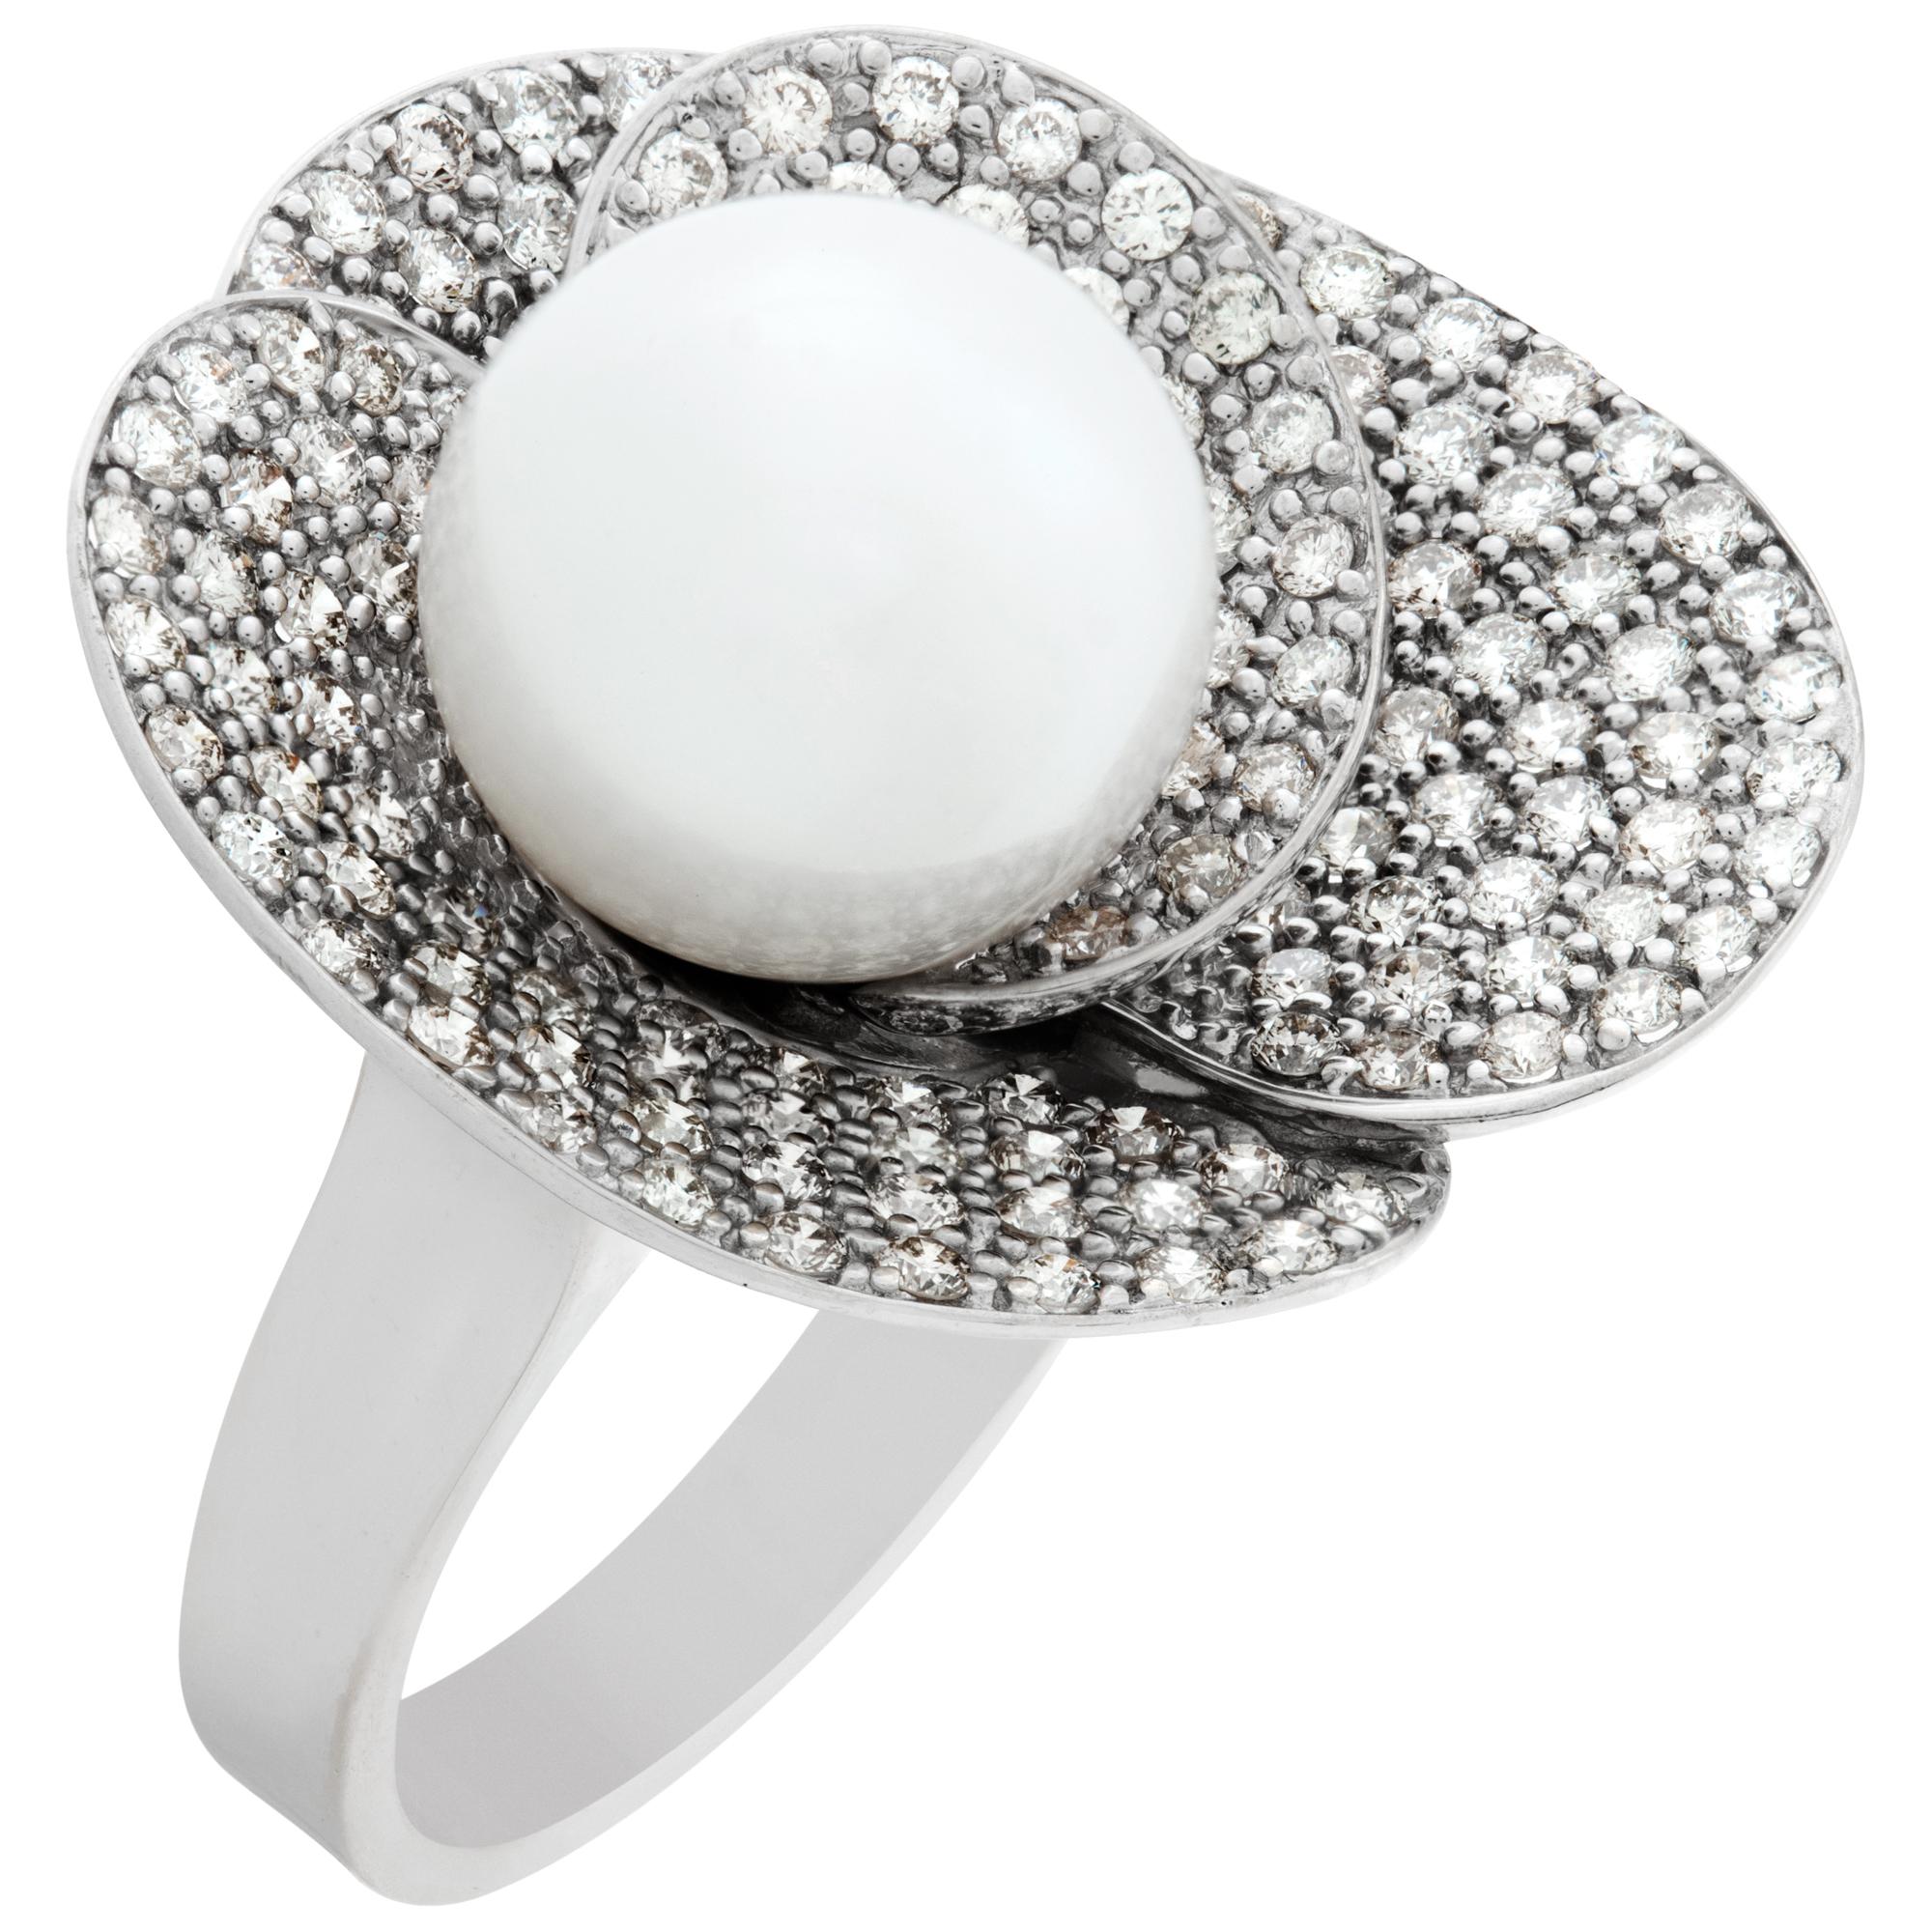 White gold pave diamond petals ring cradling a 11.3 mm cultured pearl In Excellent Condition For Sale In Surfside, FL